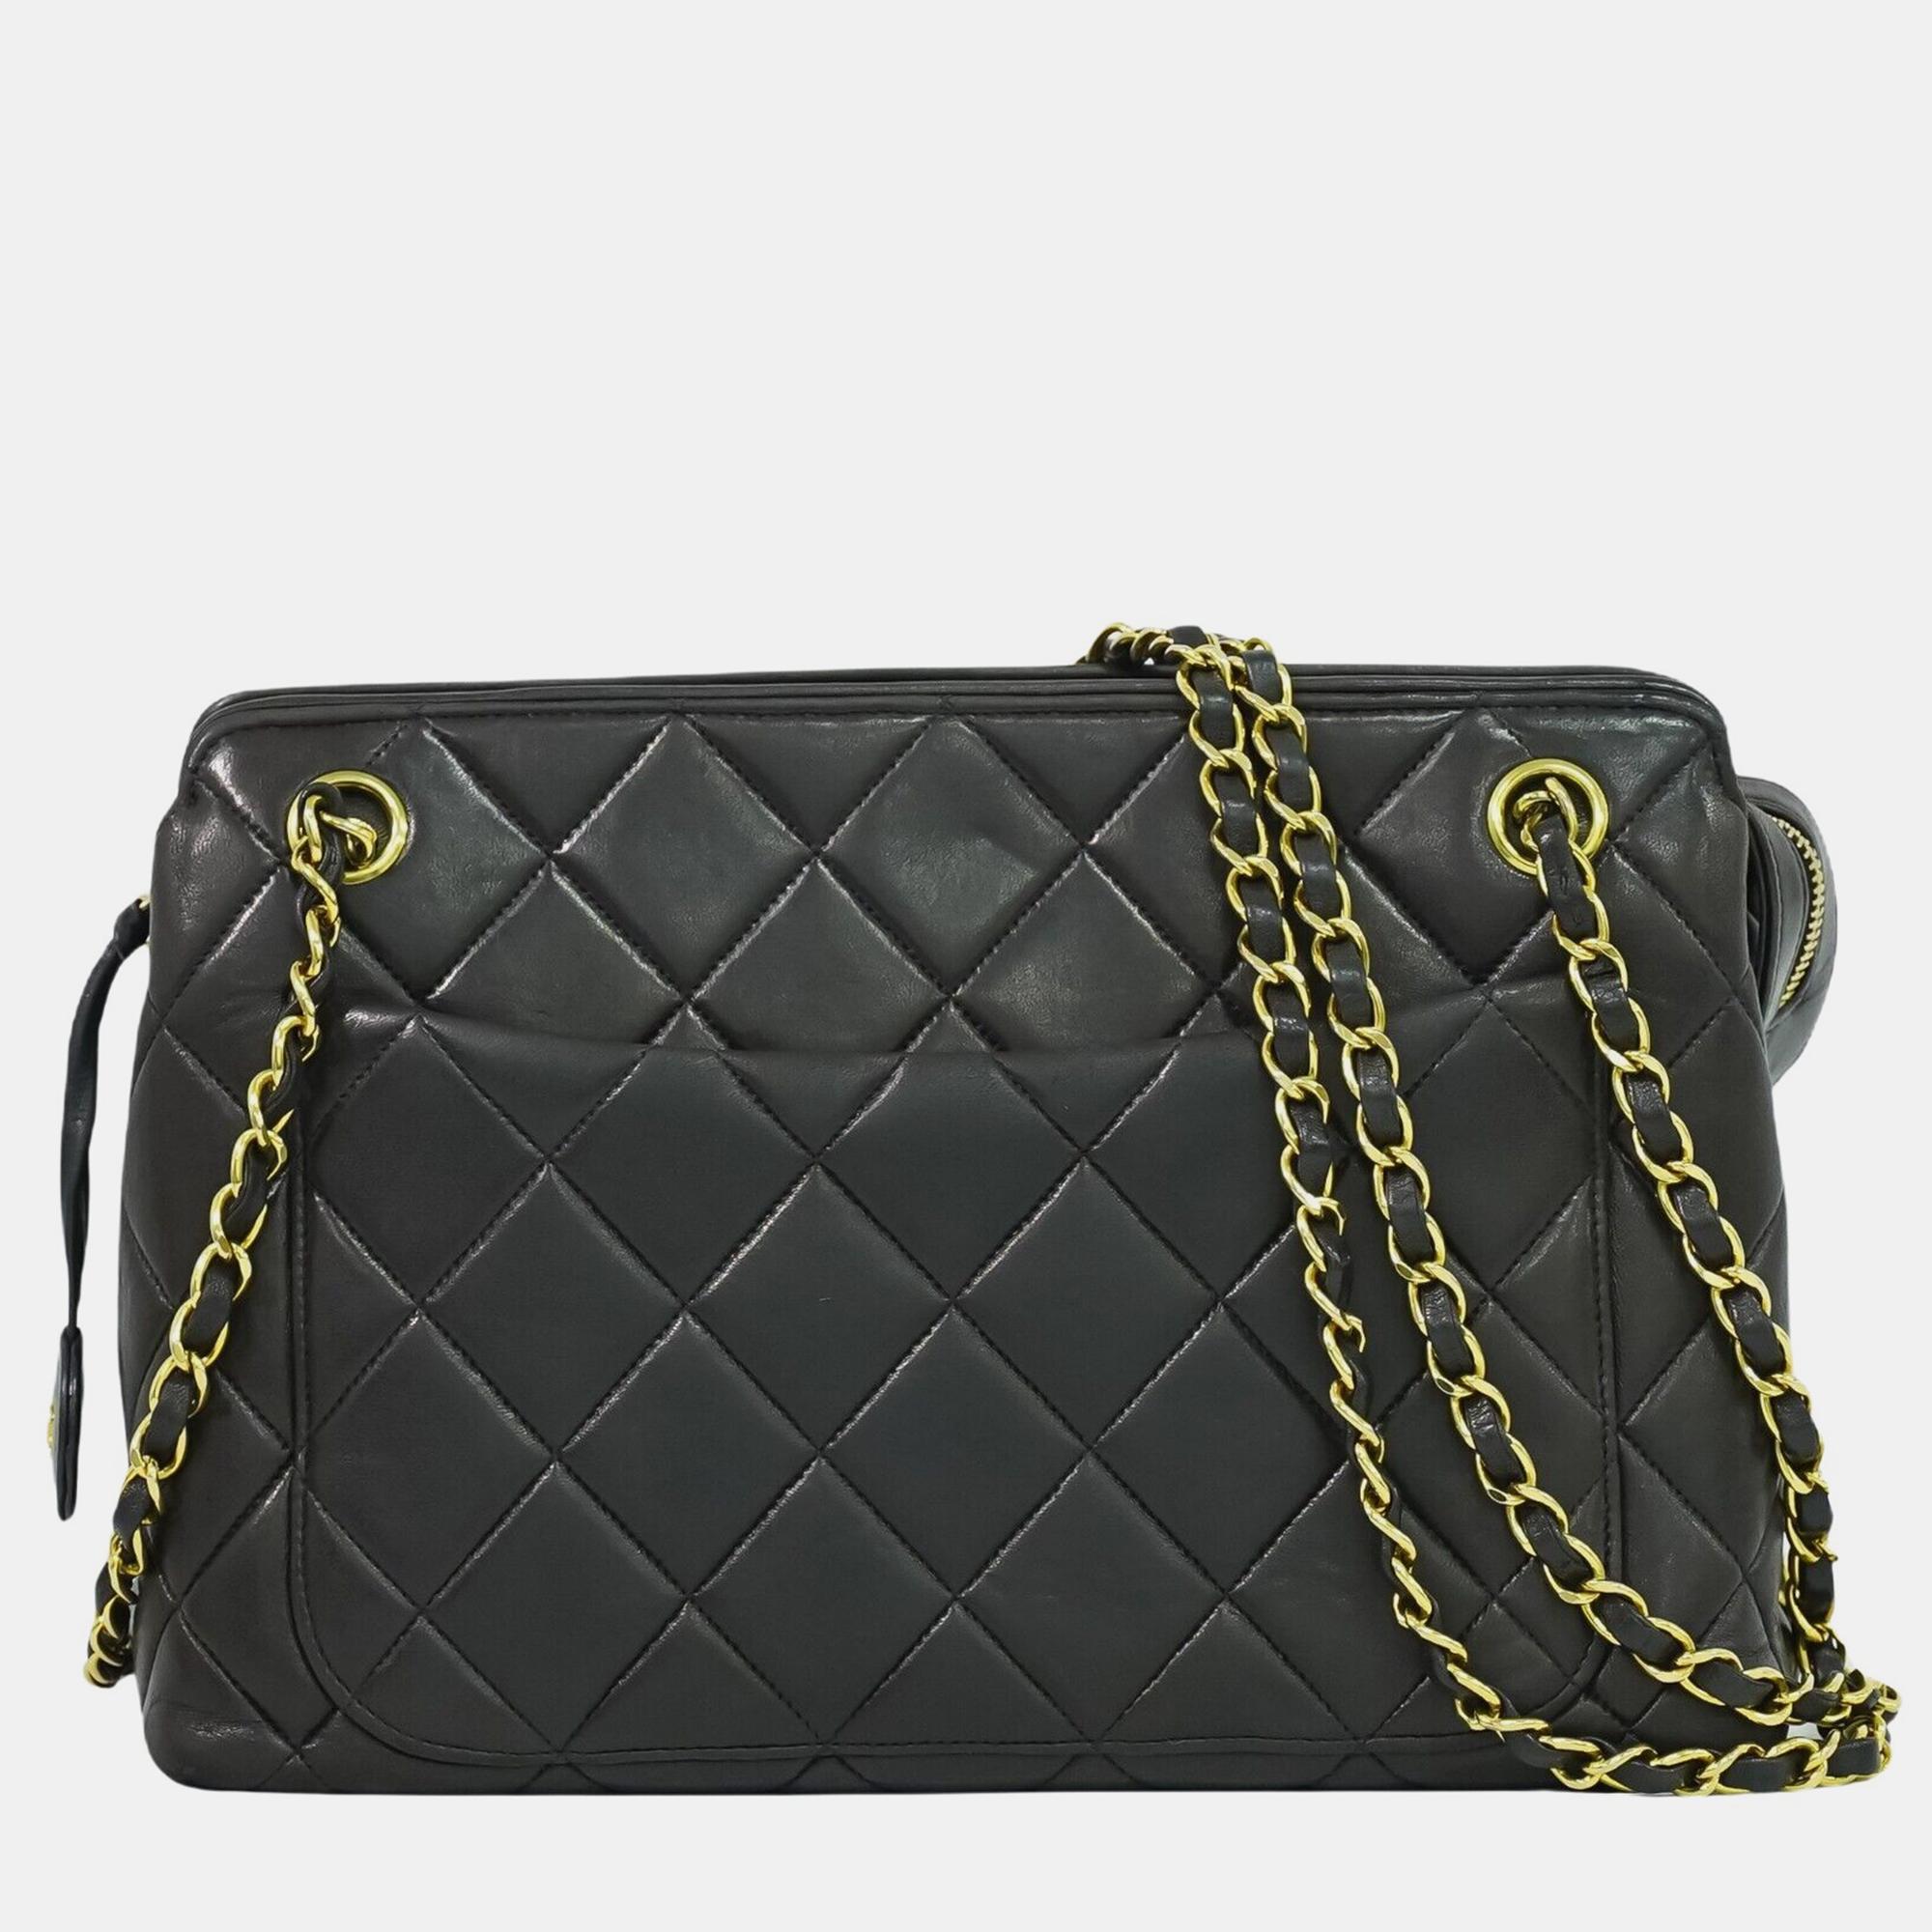 Pre-owned Chanel Black Leather Quilted Chain Shoulder Bag